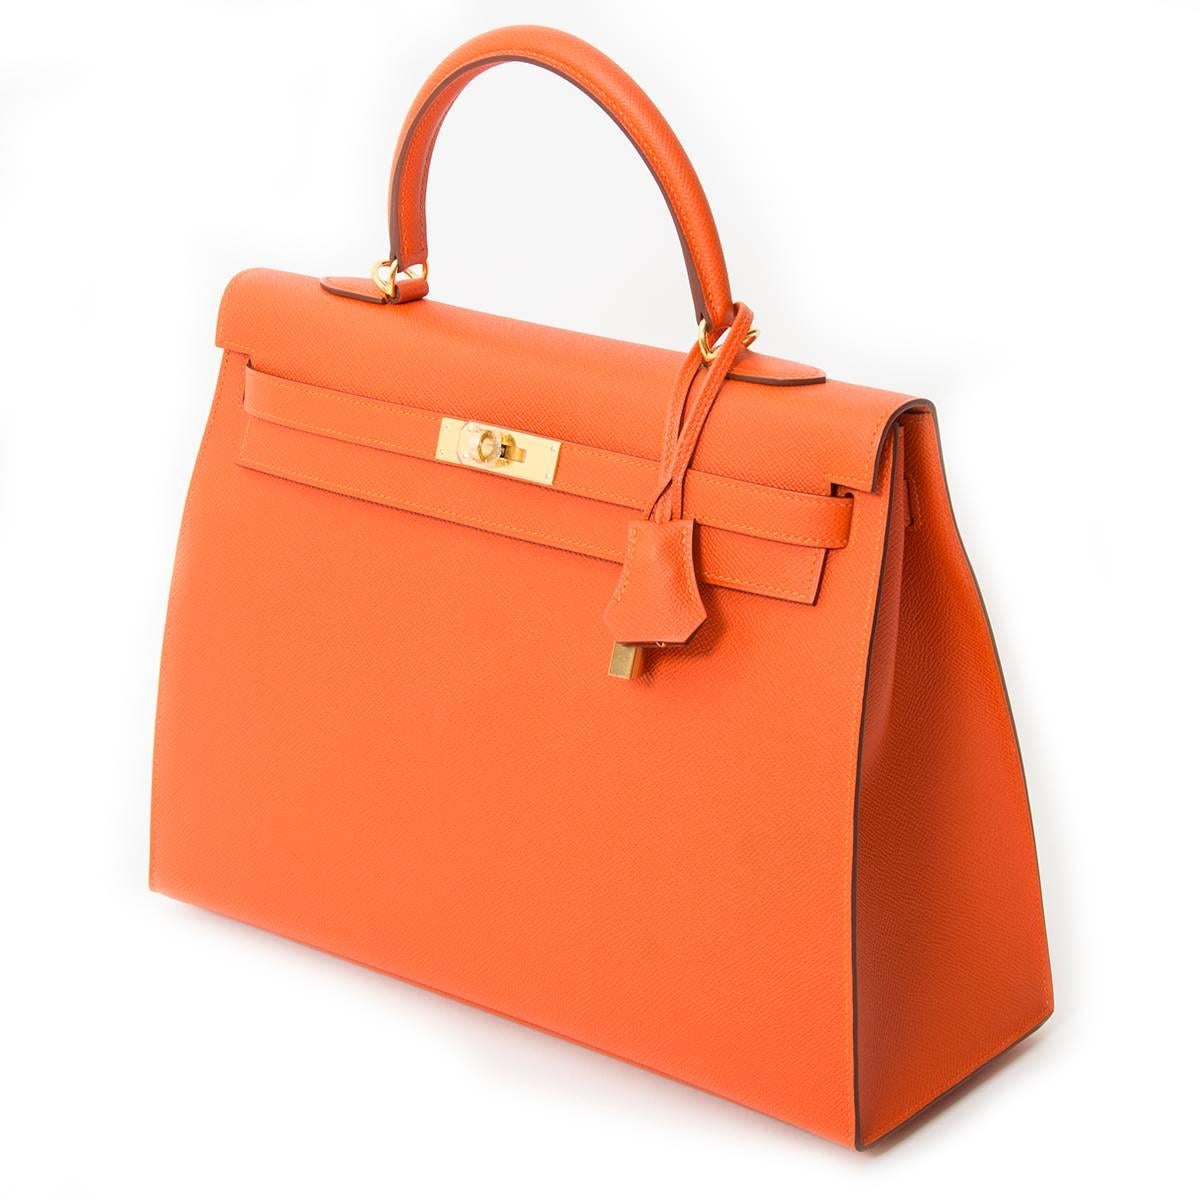 Hermès Kelly 35 Epsom  in Feu Orange,a bright orange color, it is brighter and sharper than the classic Hermes orange.

This compressed type of epsom leather holds true to its shape in all instances and is completely resilient to scratches. This